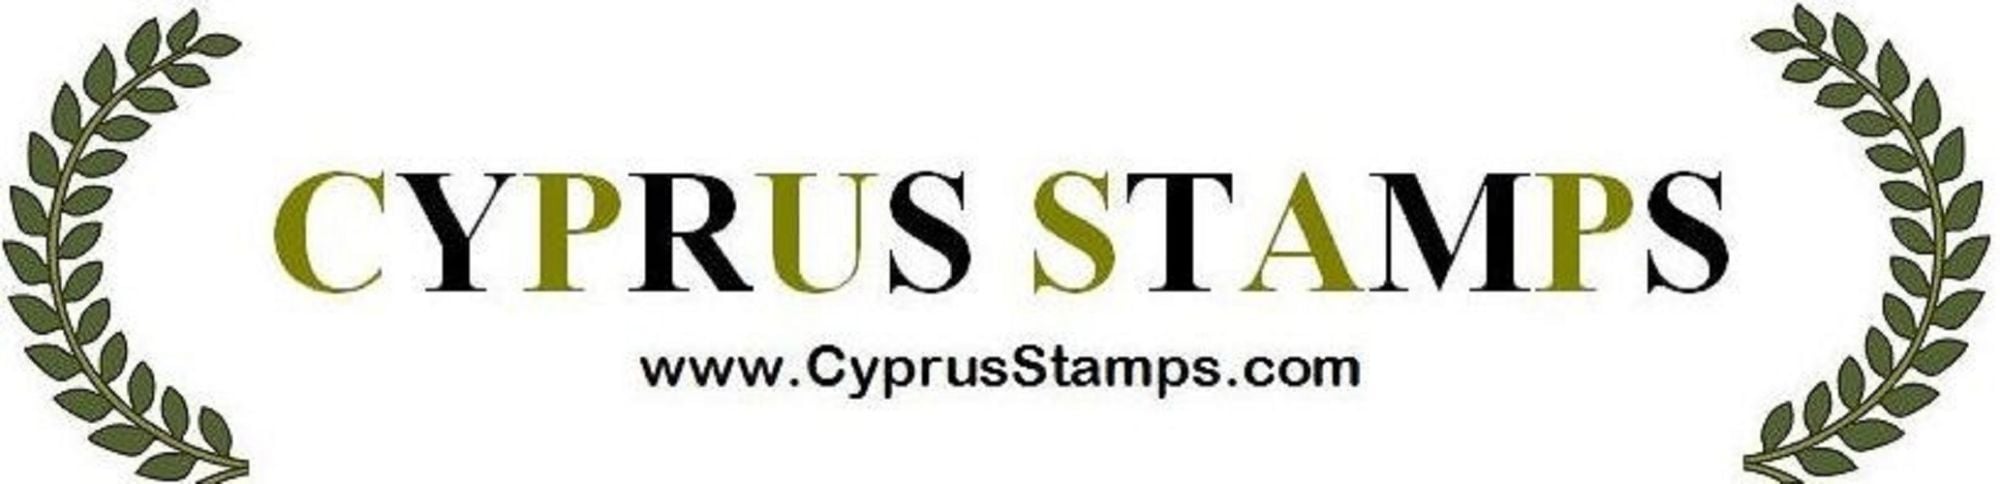 Cyprus Stamps UK based online shop for postage stamp issues, FDCs, Postal History and Philatelia released by the Republic of Cyprus and Turkish Cyprus (North Cyprus stamps / TRNC) 